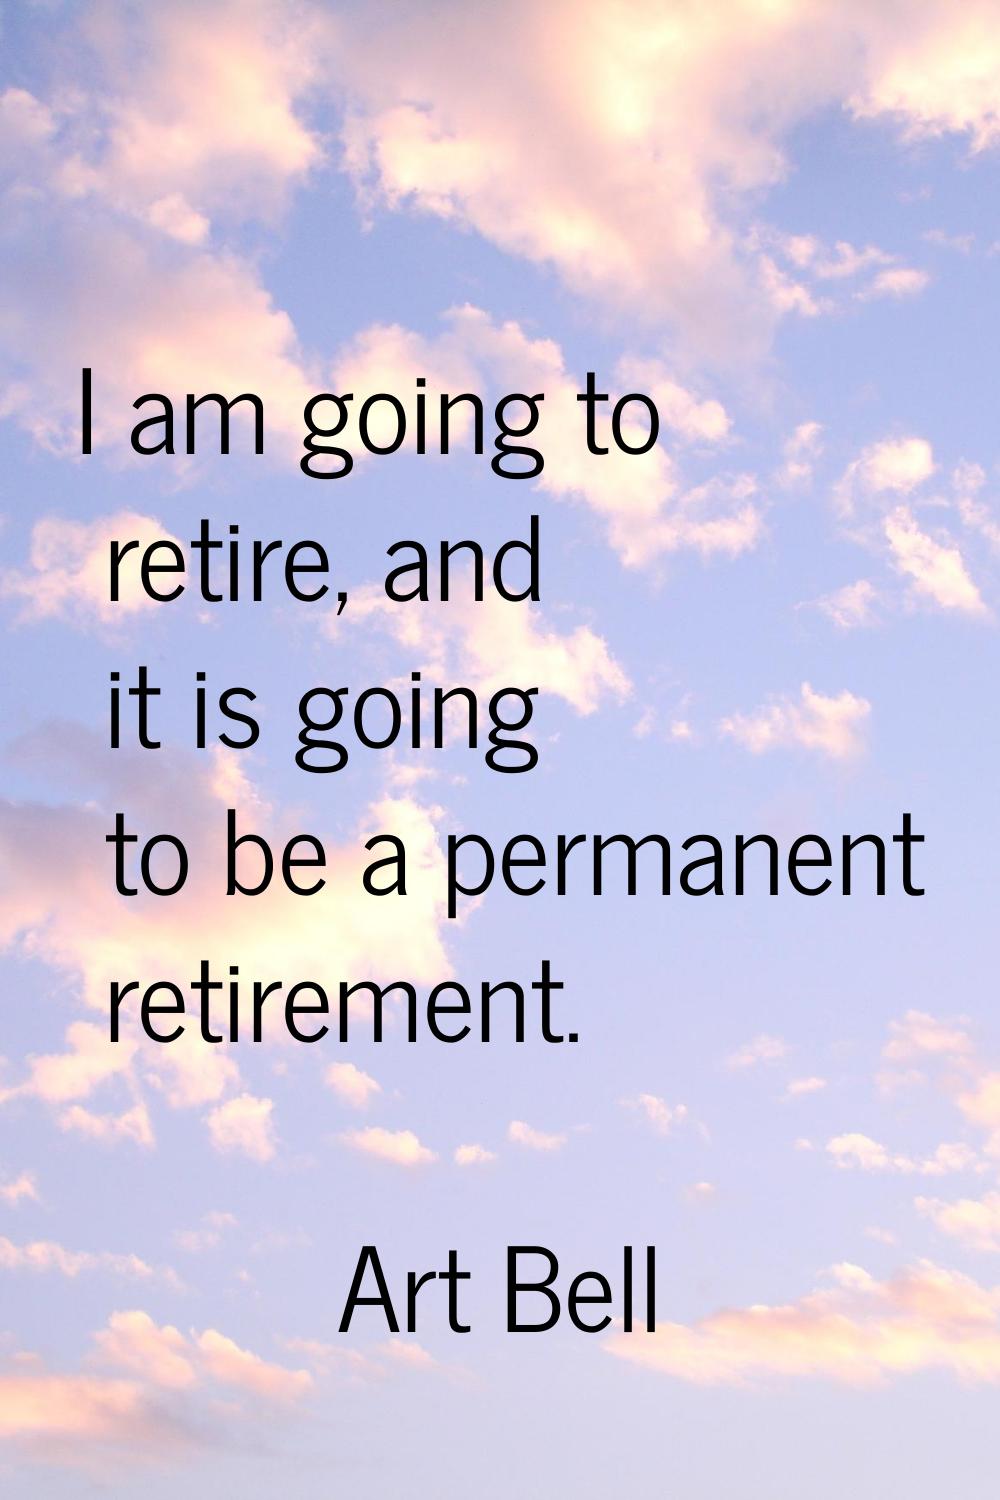 I am going to retire, and it is going to be a permanent retirement.